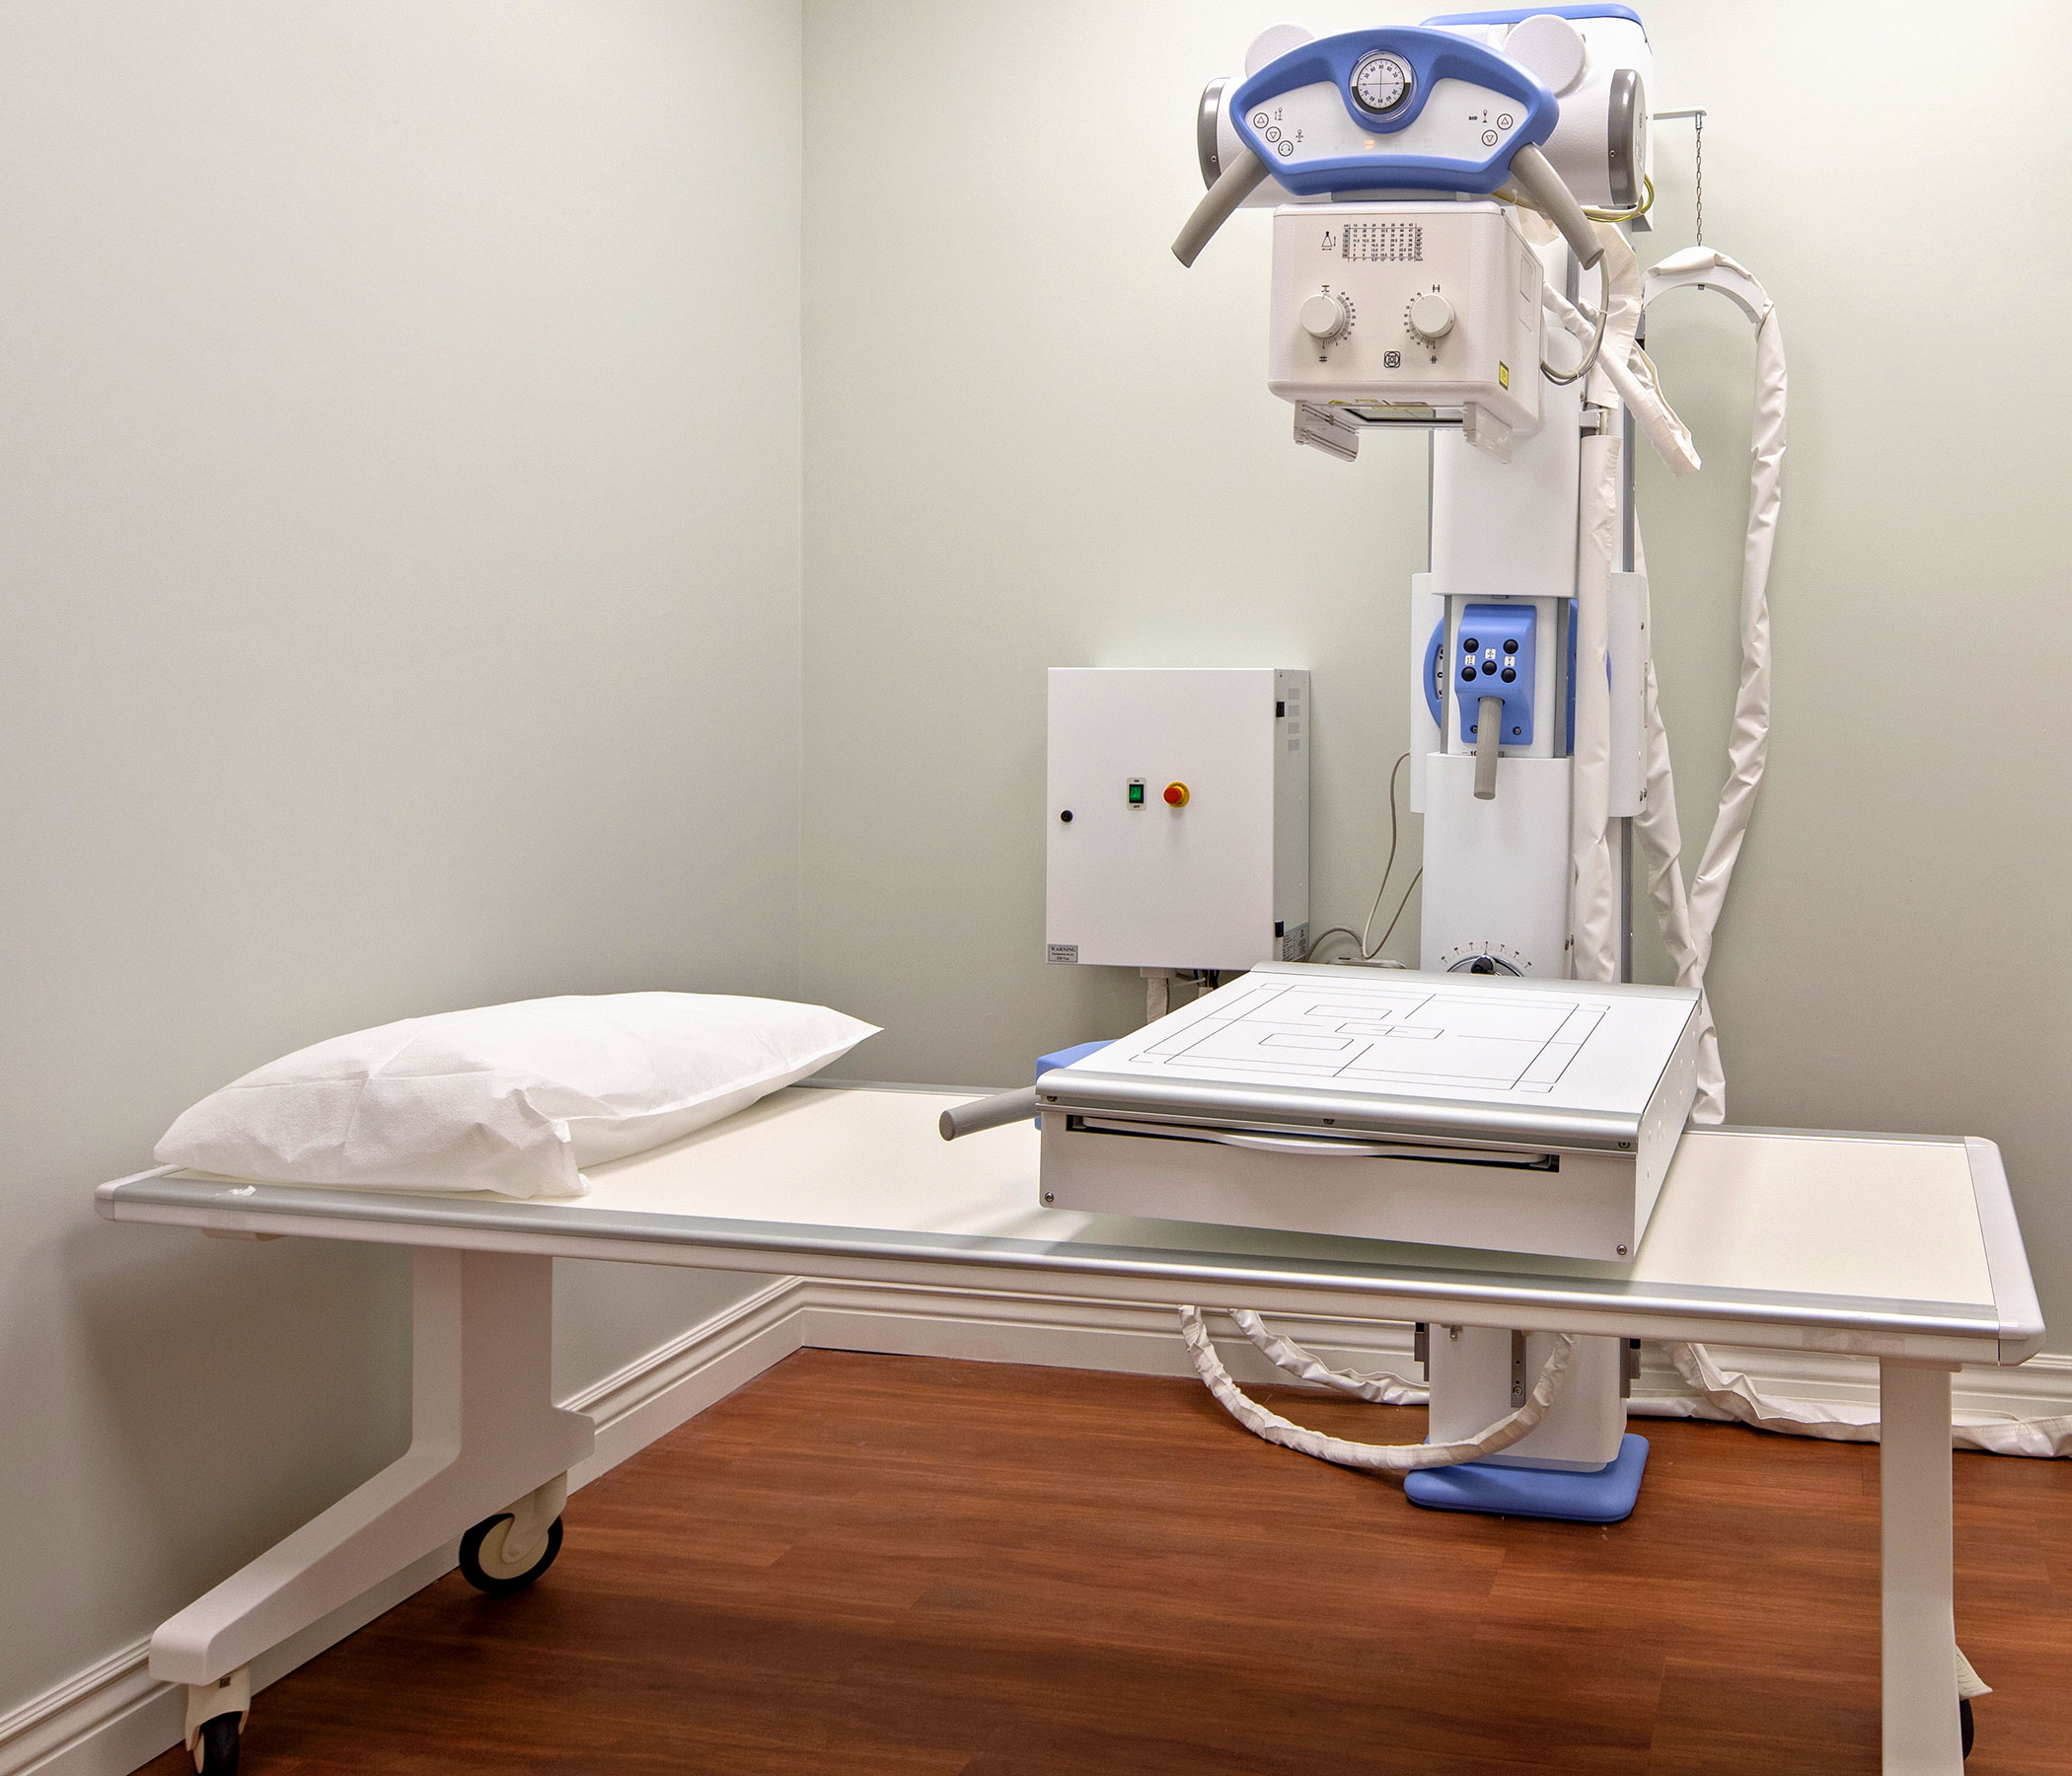 Fast & Affordable Urgent Medical Care at MD Now.